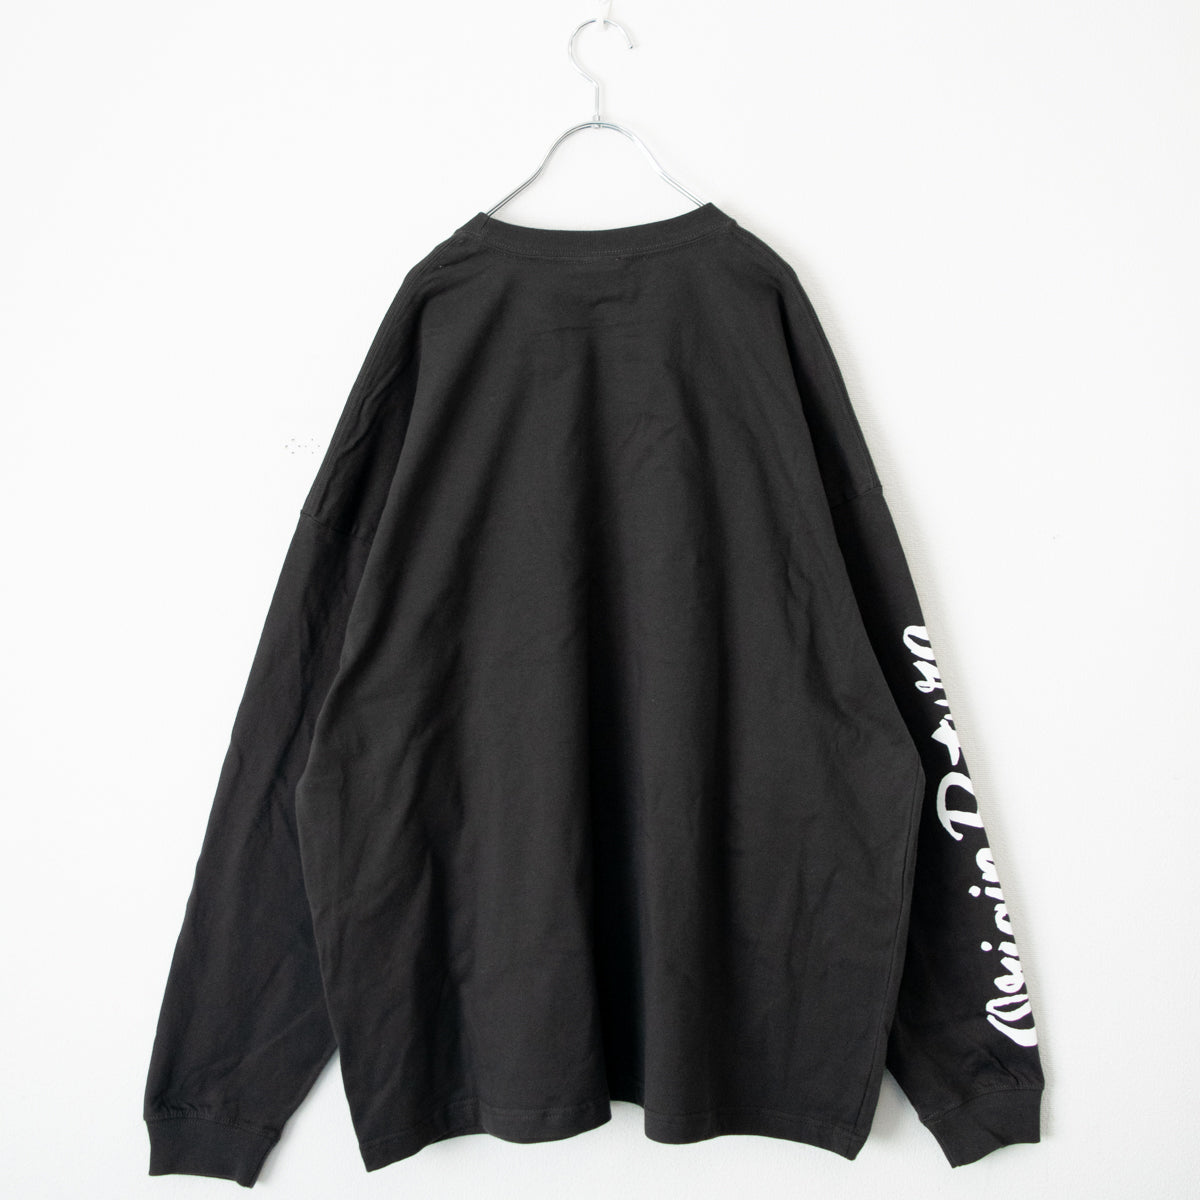 404 NOT FOUND by Gummy Big Silhouette Long Sleeve T-Shirt Long T CHARCOAL